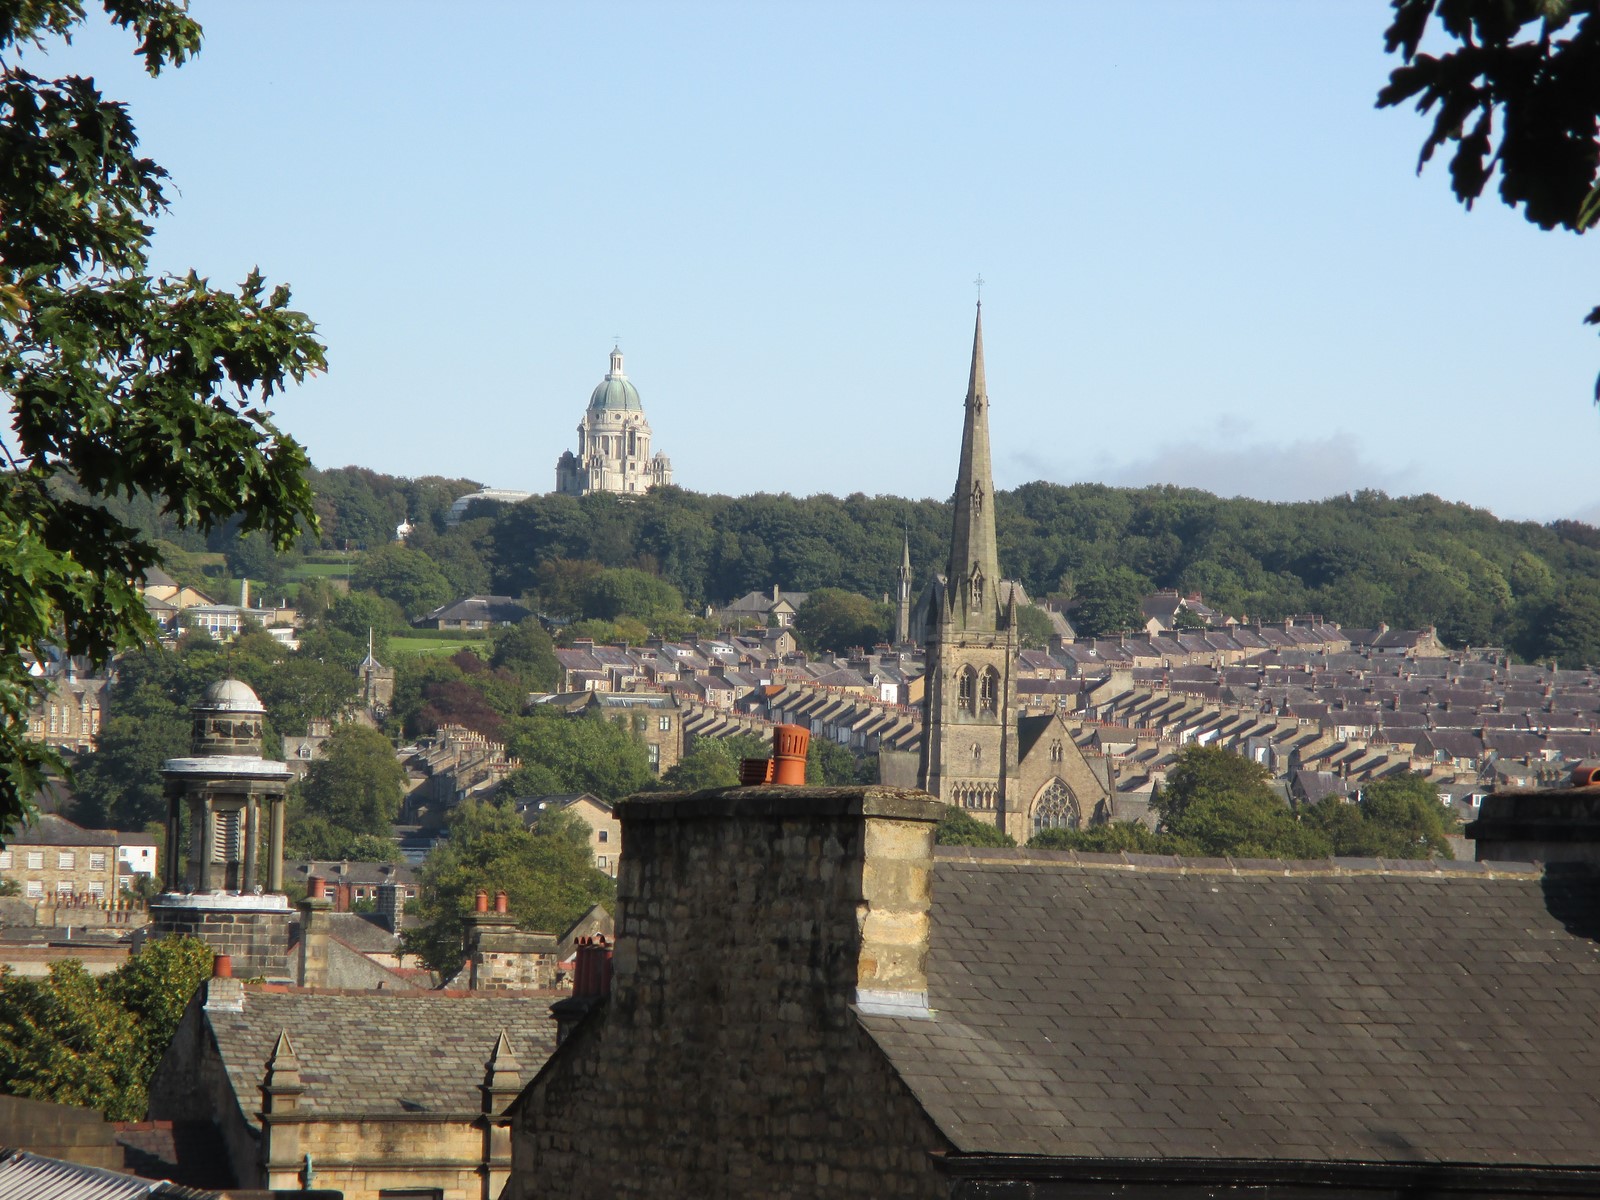 Lancaster Cathedral in the middle distance, and the Ashton Memorial